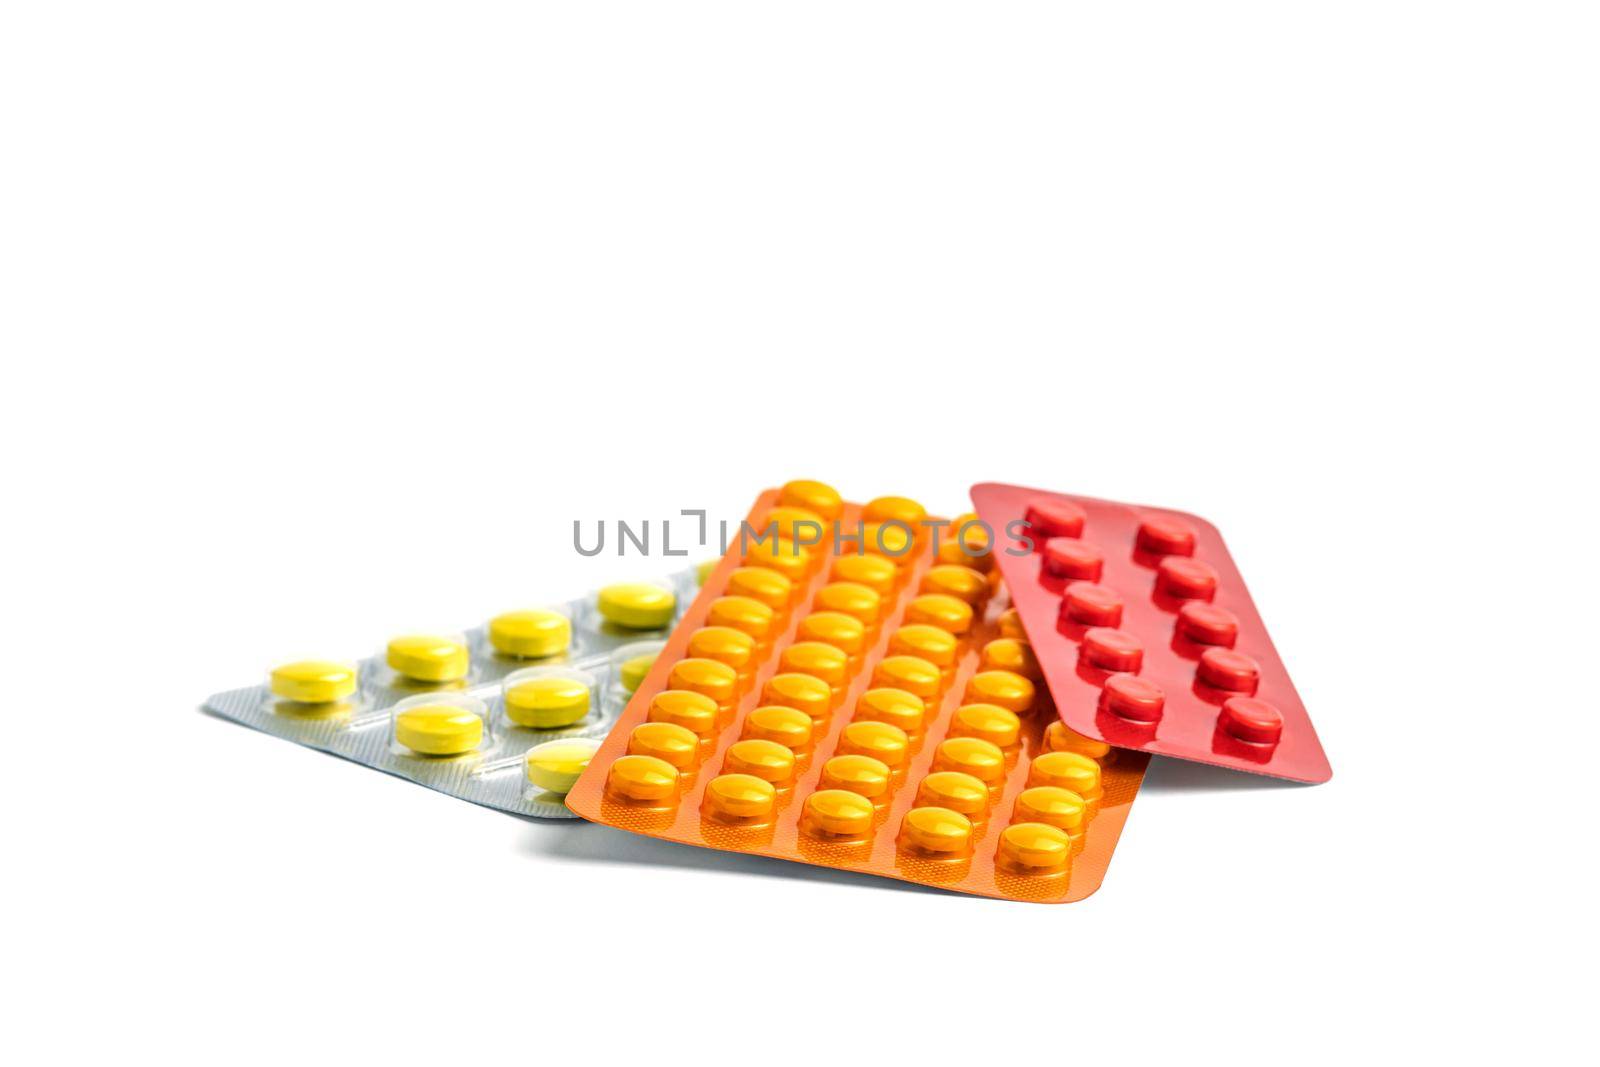 Group of medicines isolated on white. Medicinal anti-inflammatory drugs in multi-colored packaging. Pharmacy pharmacological preparations.